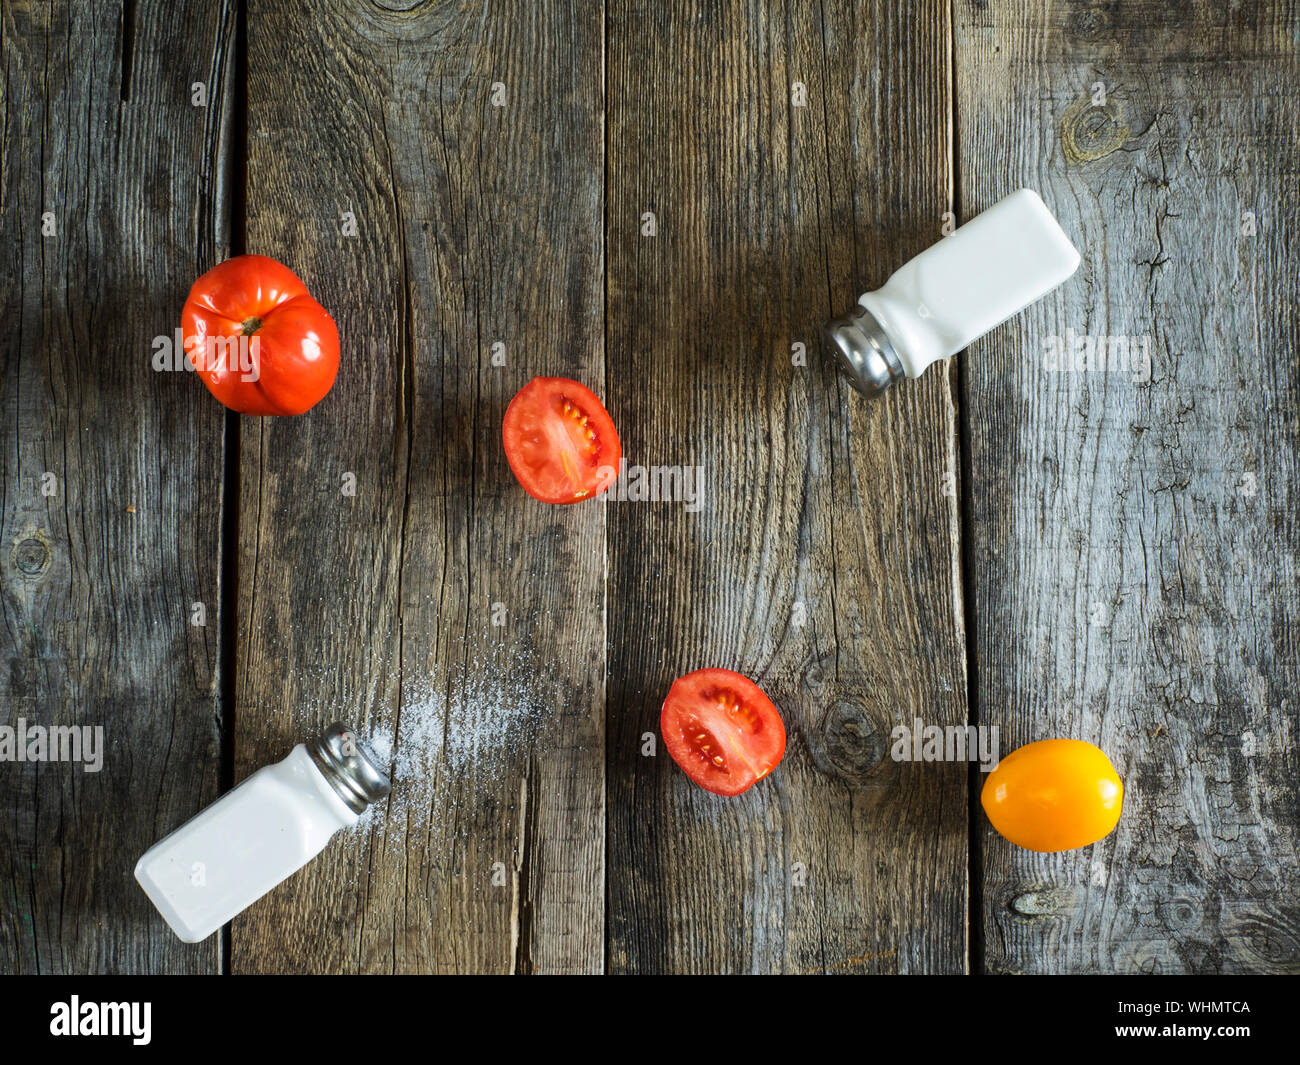 Directly Above View Of Shakers With Tomatoes On Wooden Table Stock Photo